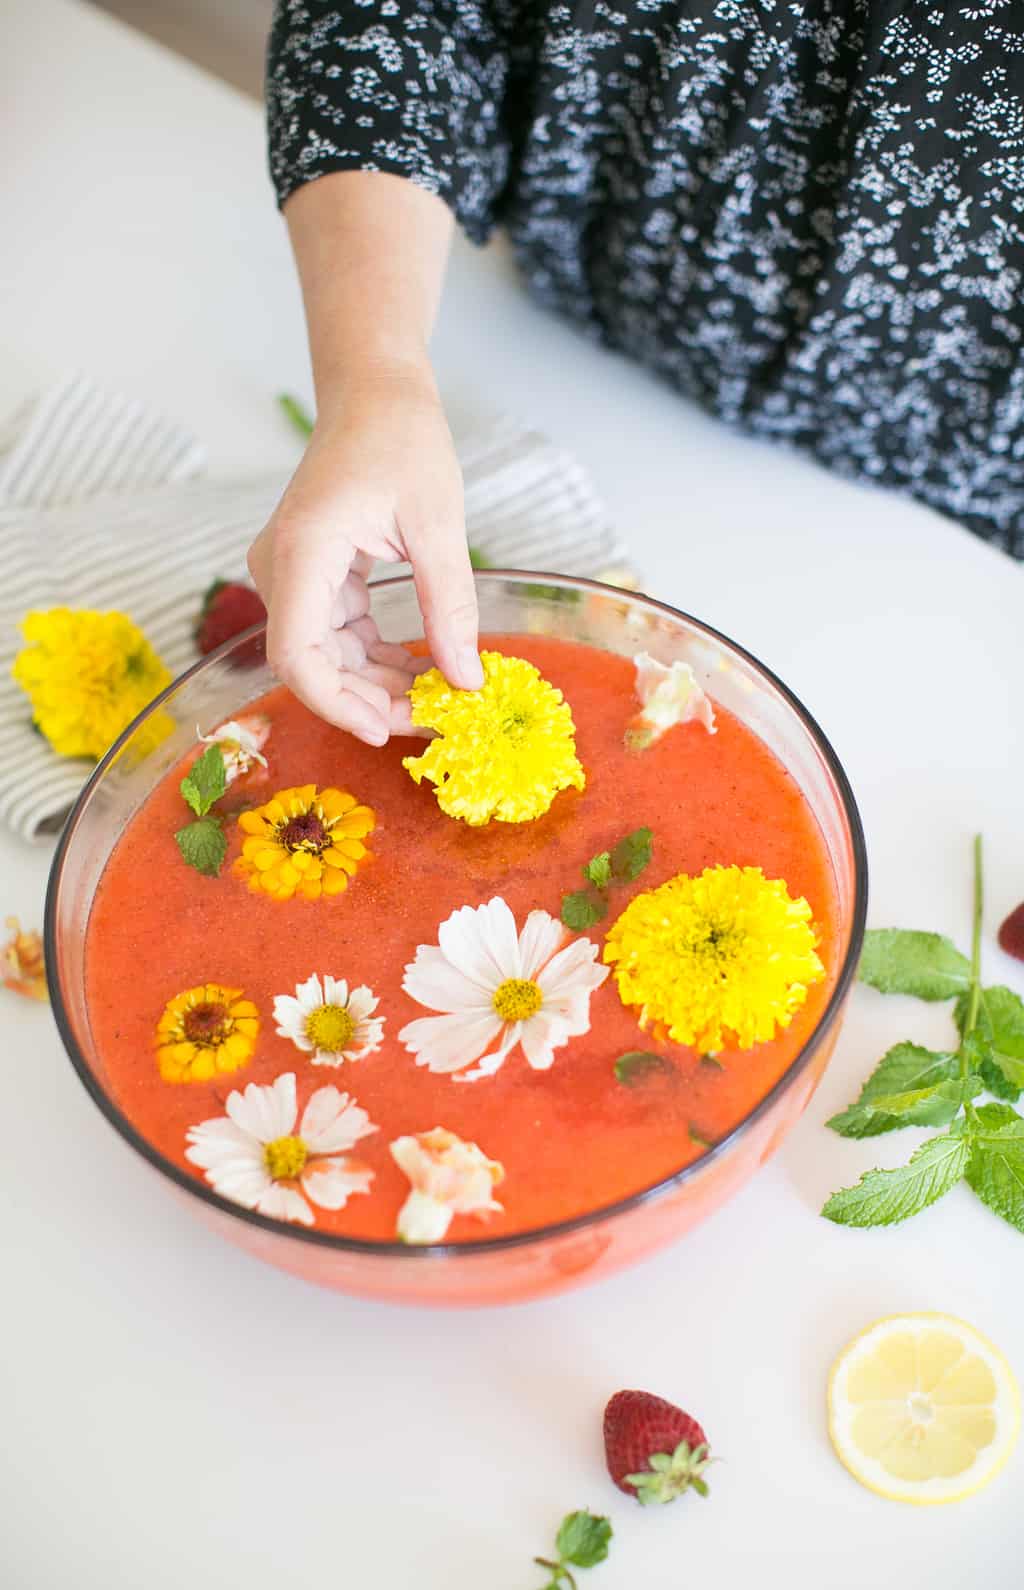 Fresh-Squeezed Strawberry Lemonade with Rosewater and Edible Flowers